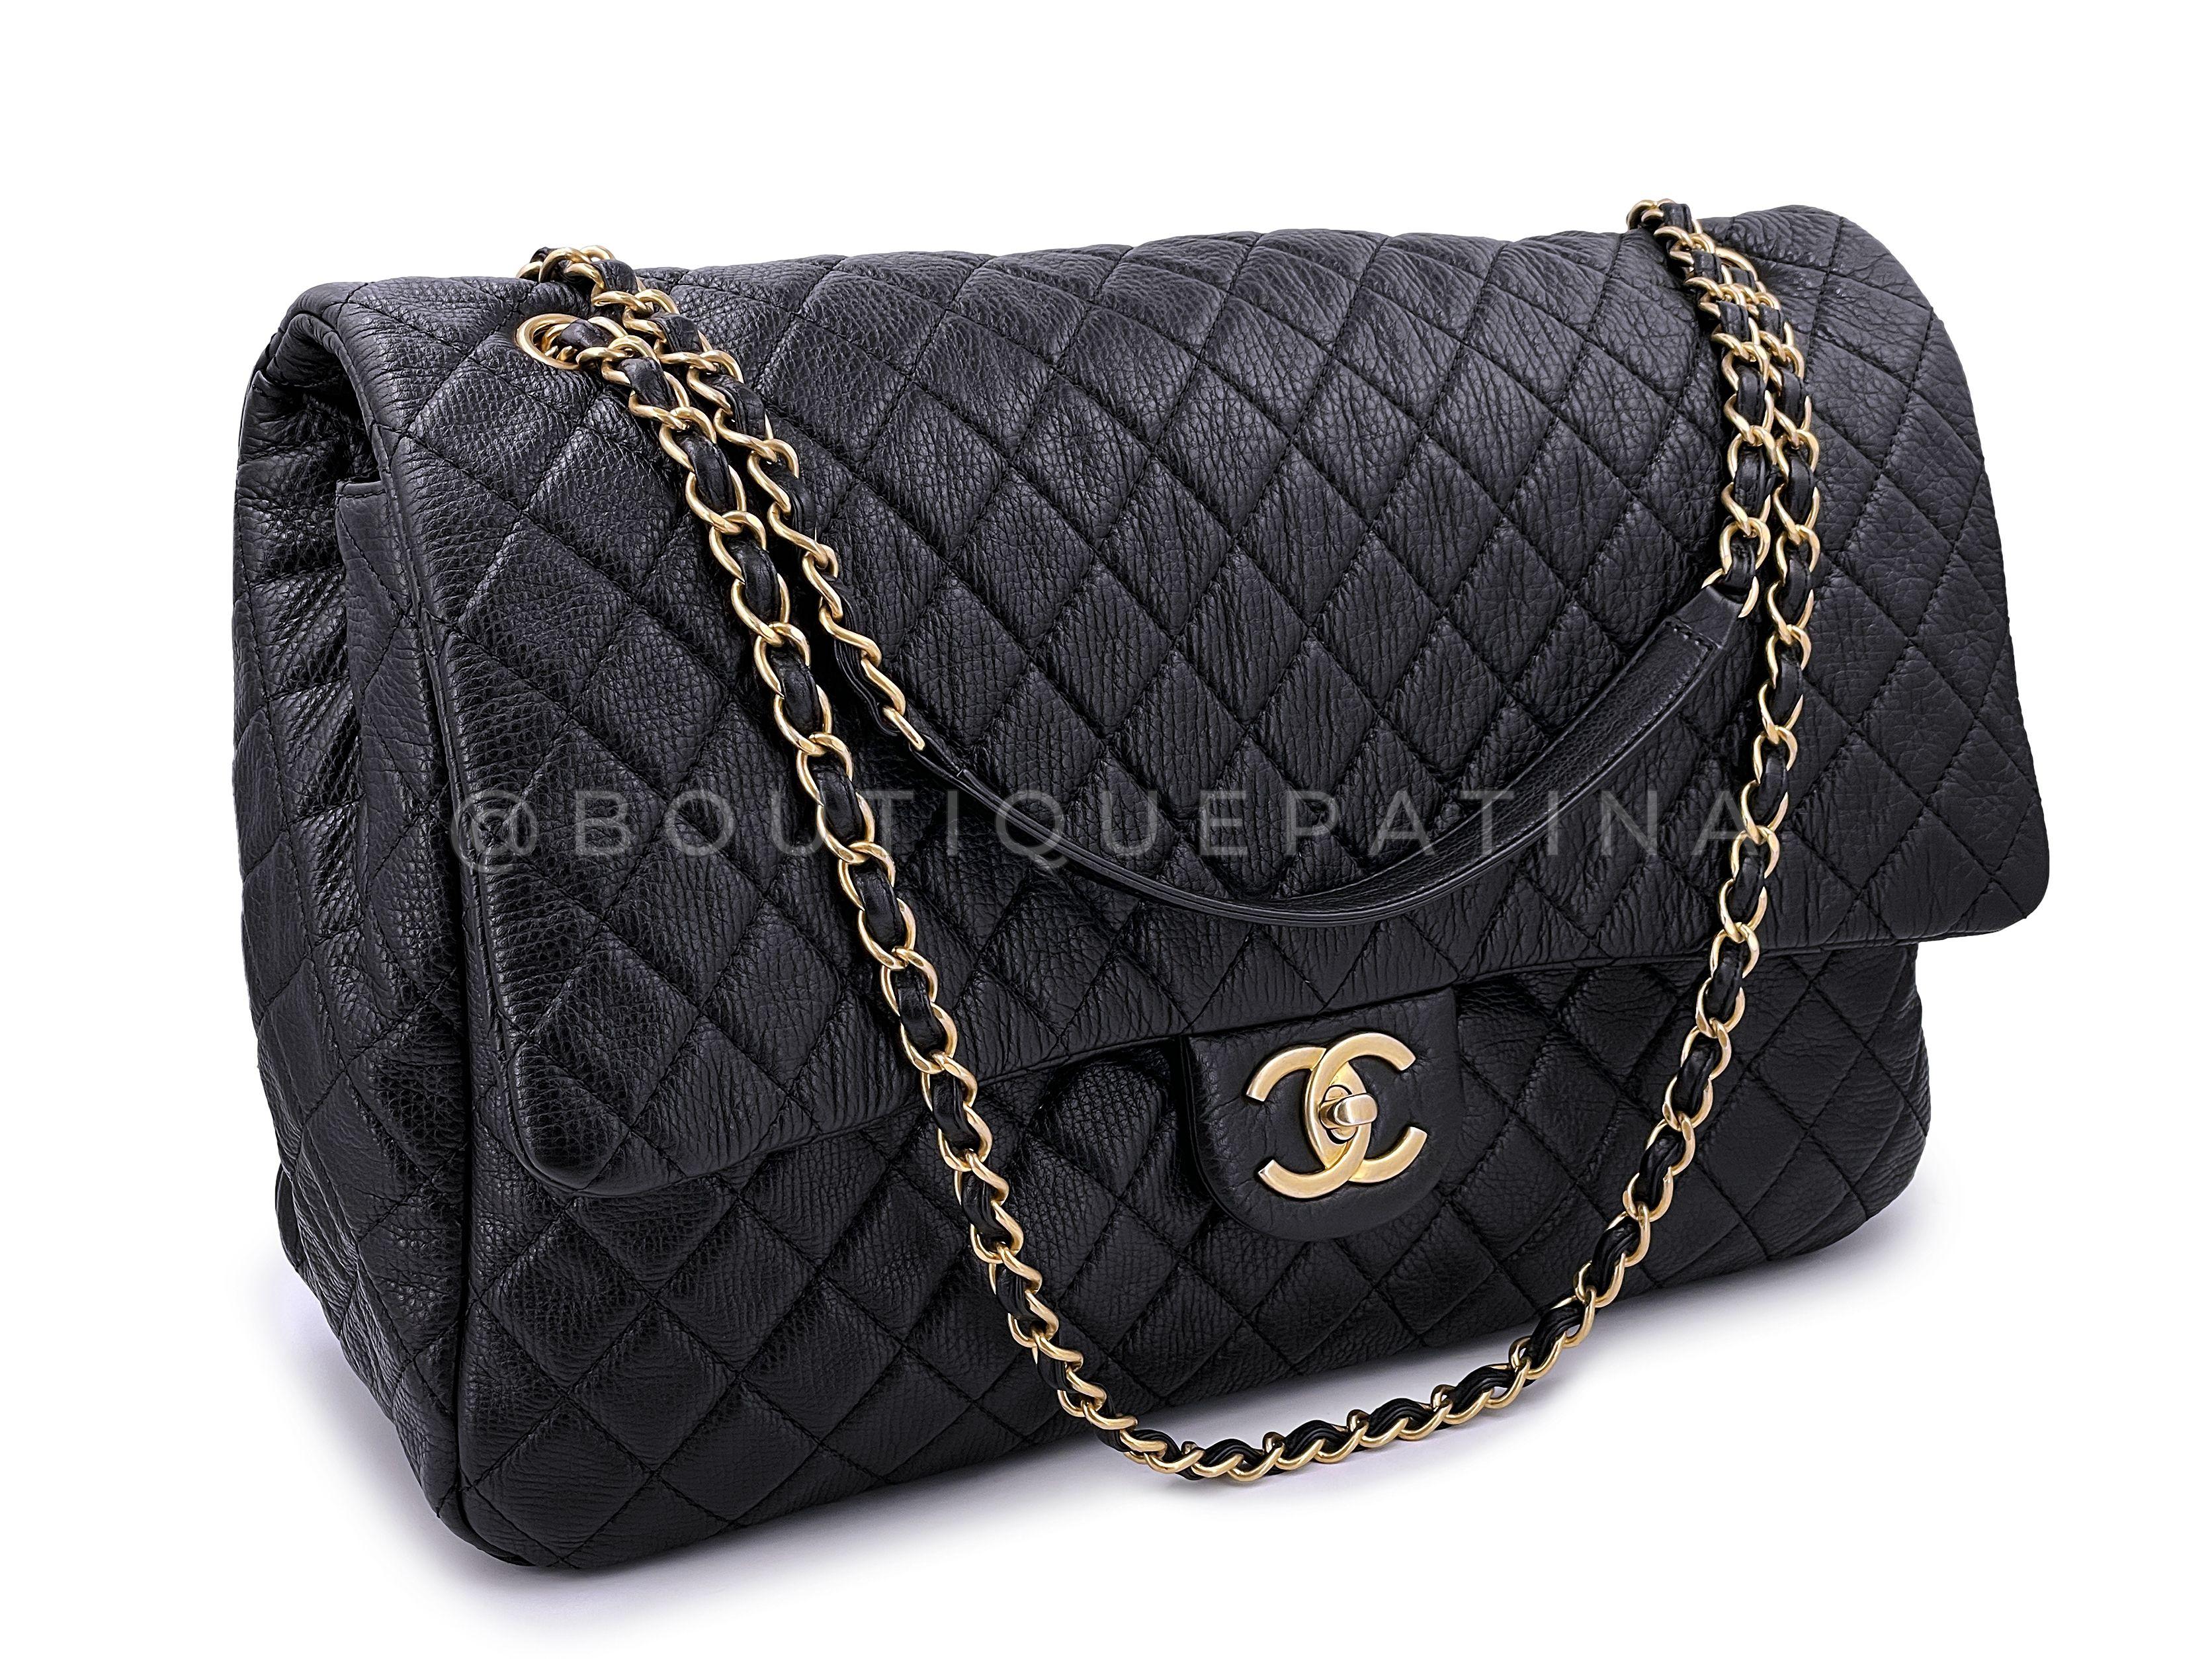 Chanel Grey Quilted Fabric Limited Edition XXL Reissue Travel Bag